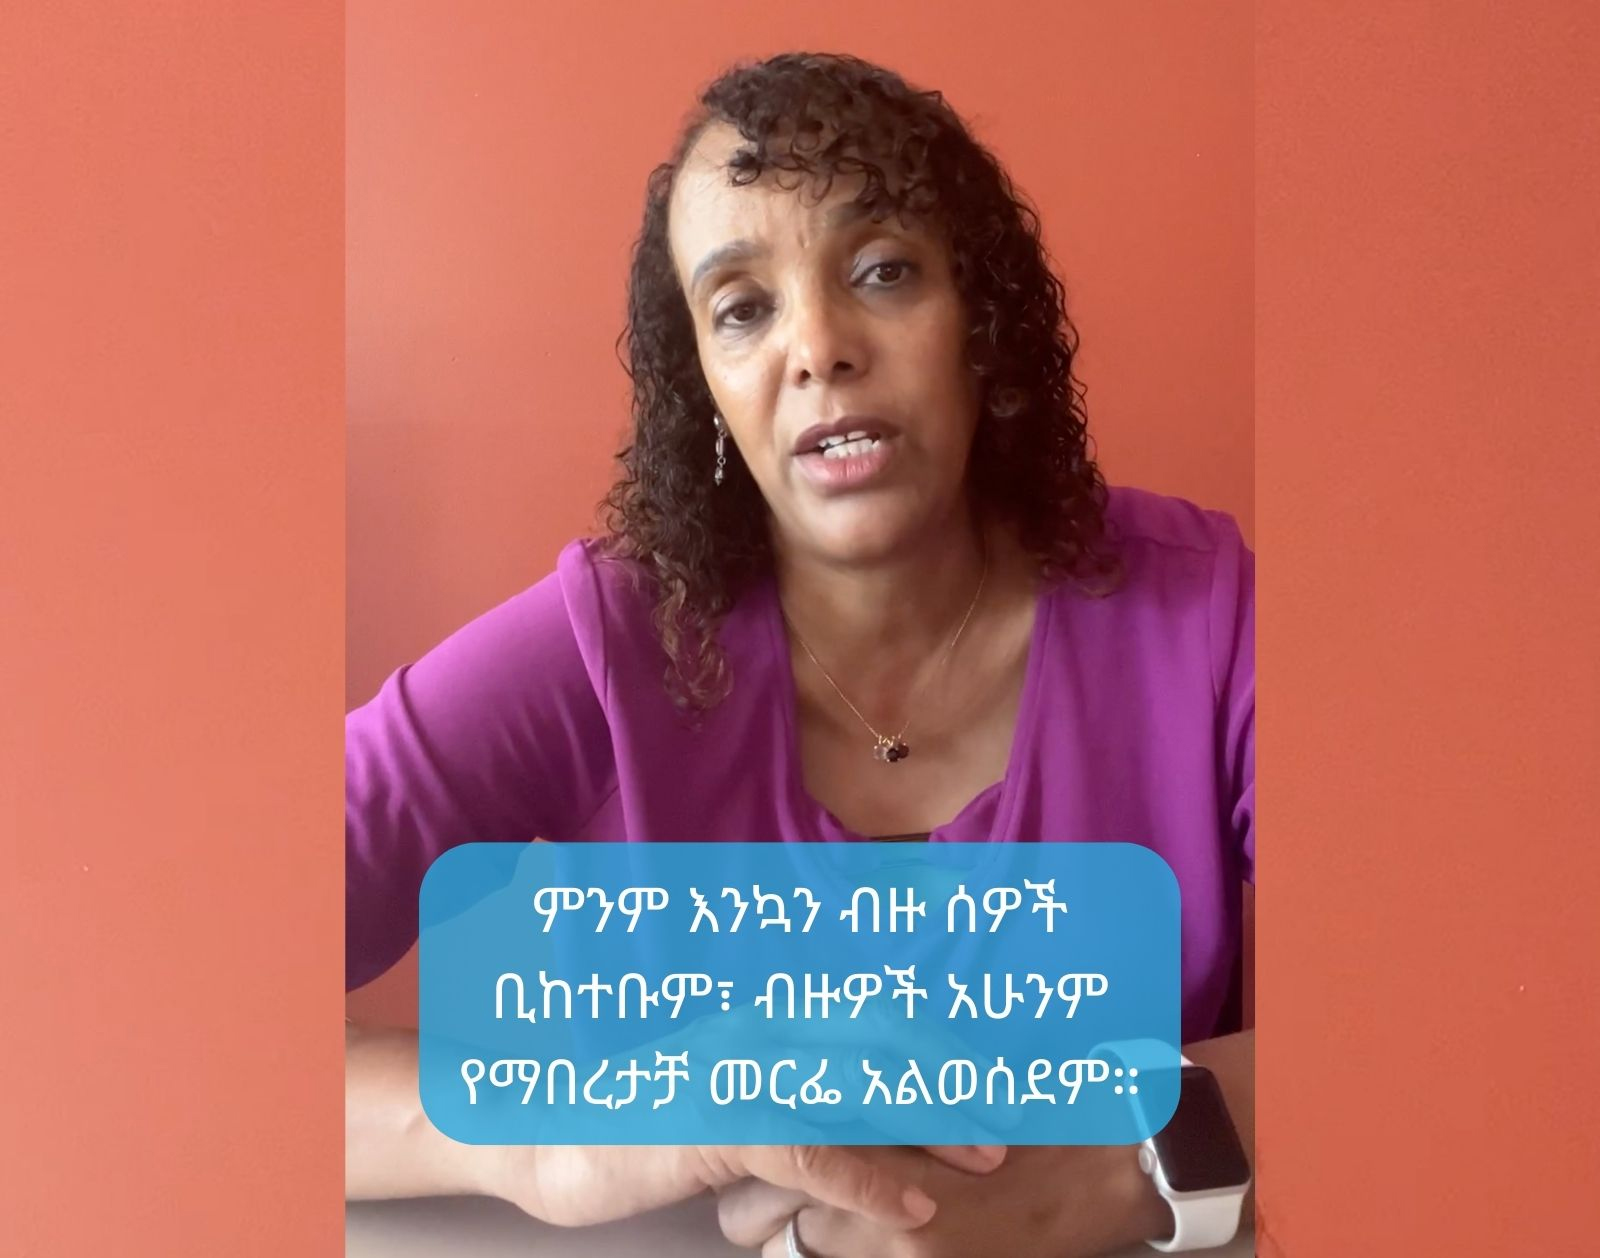 Woman talking to camera, subtitled in Amharic